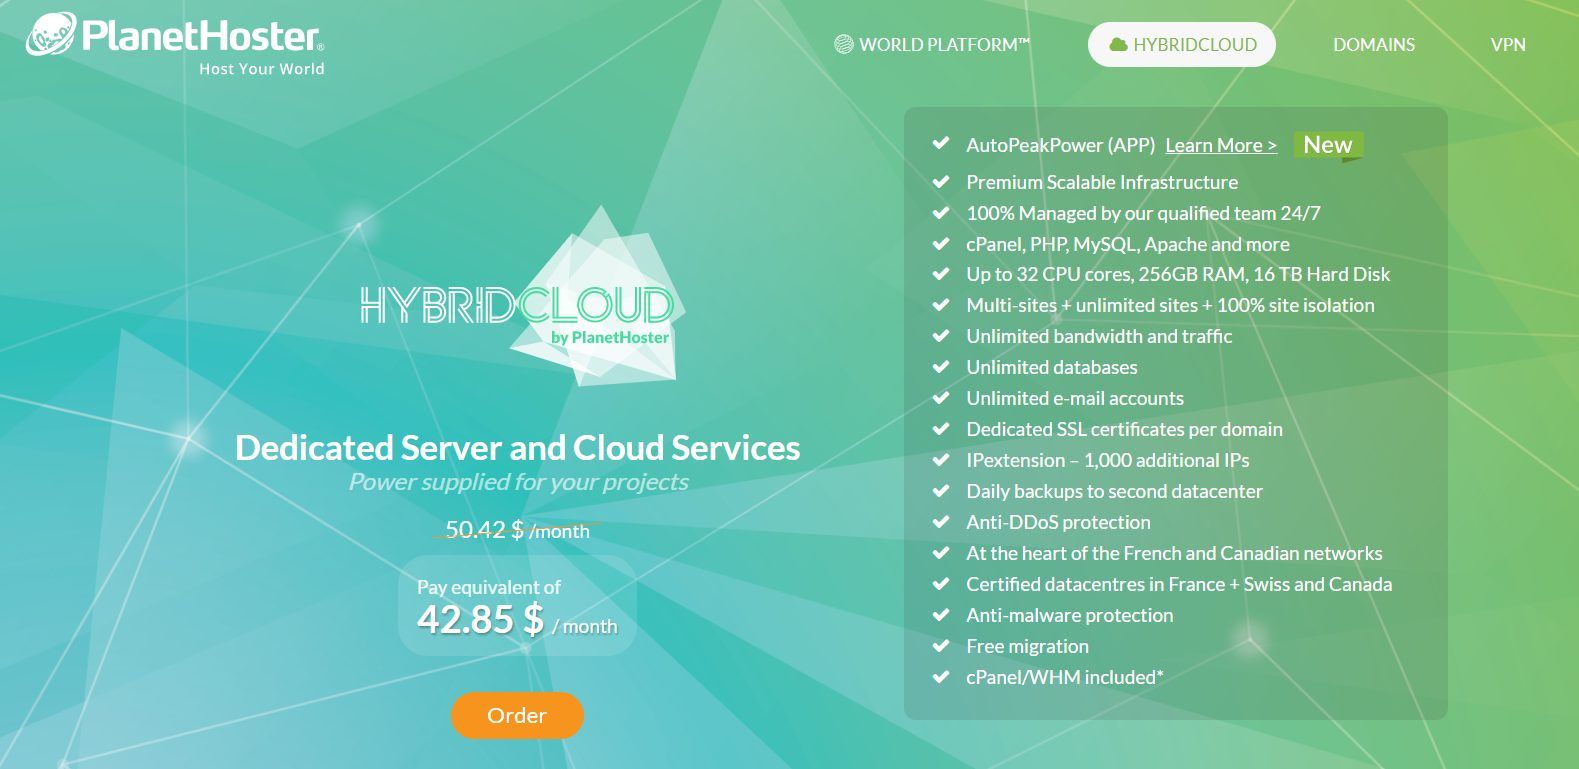 PlanetHoster HybridCloud